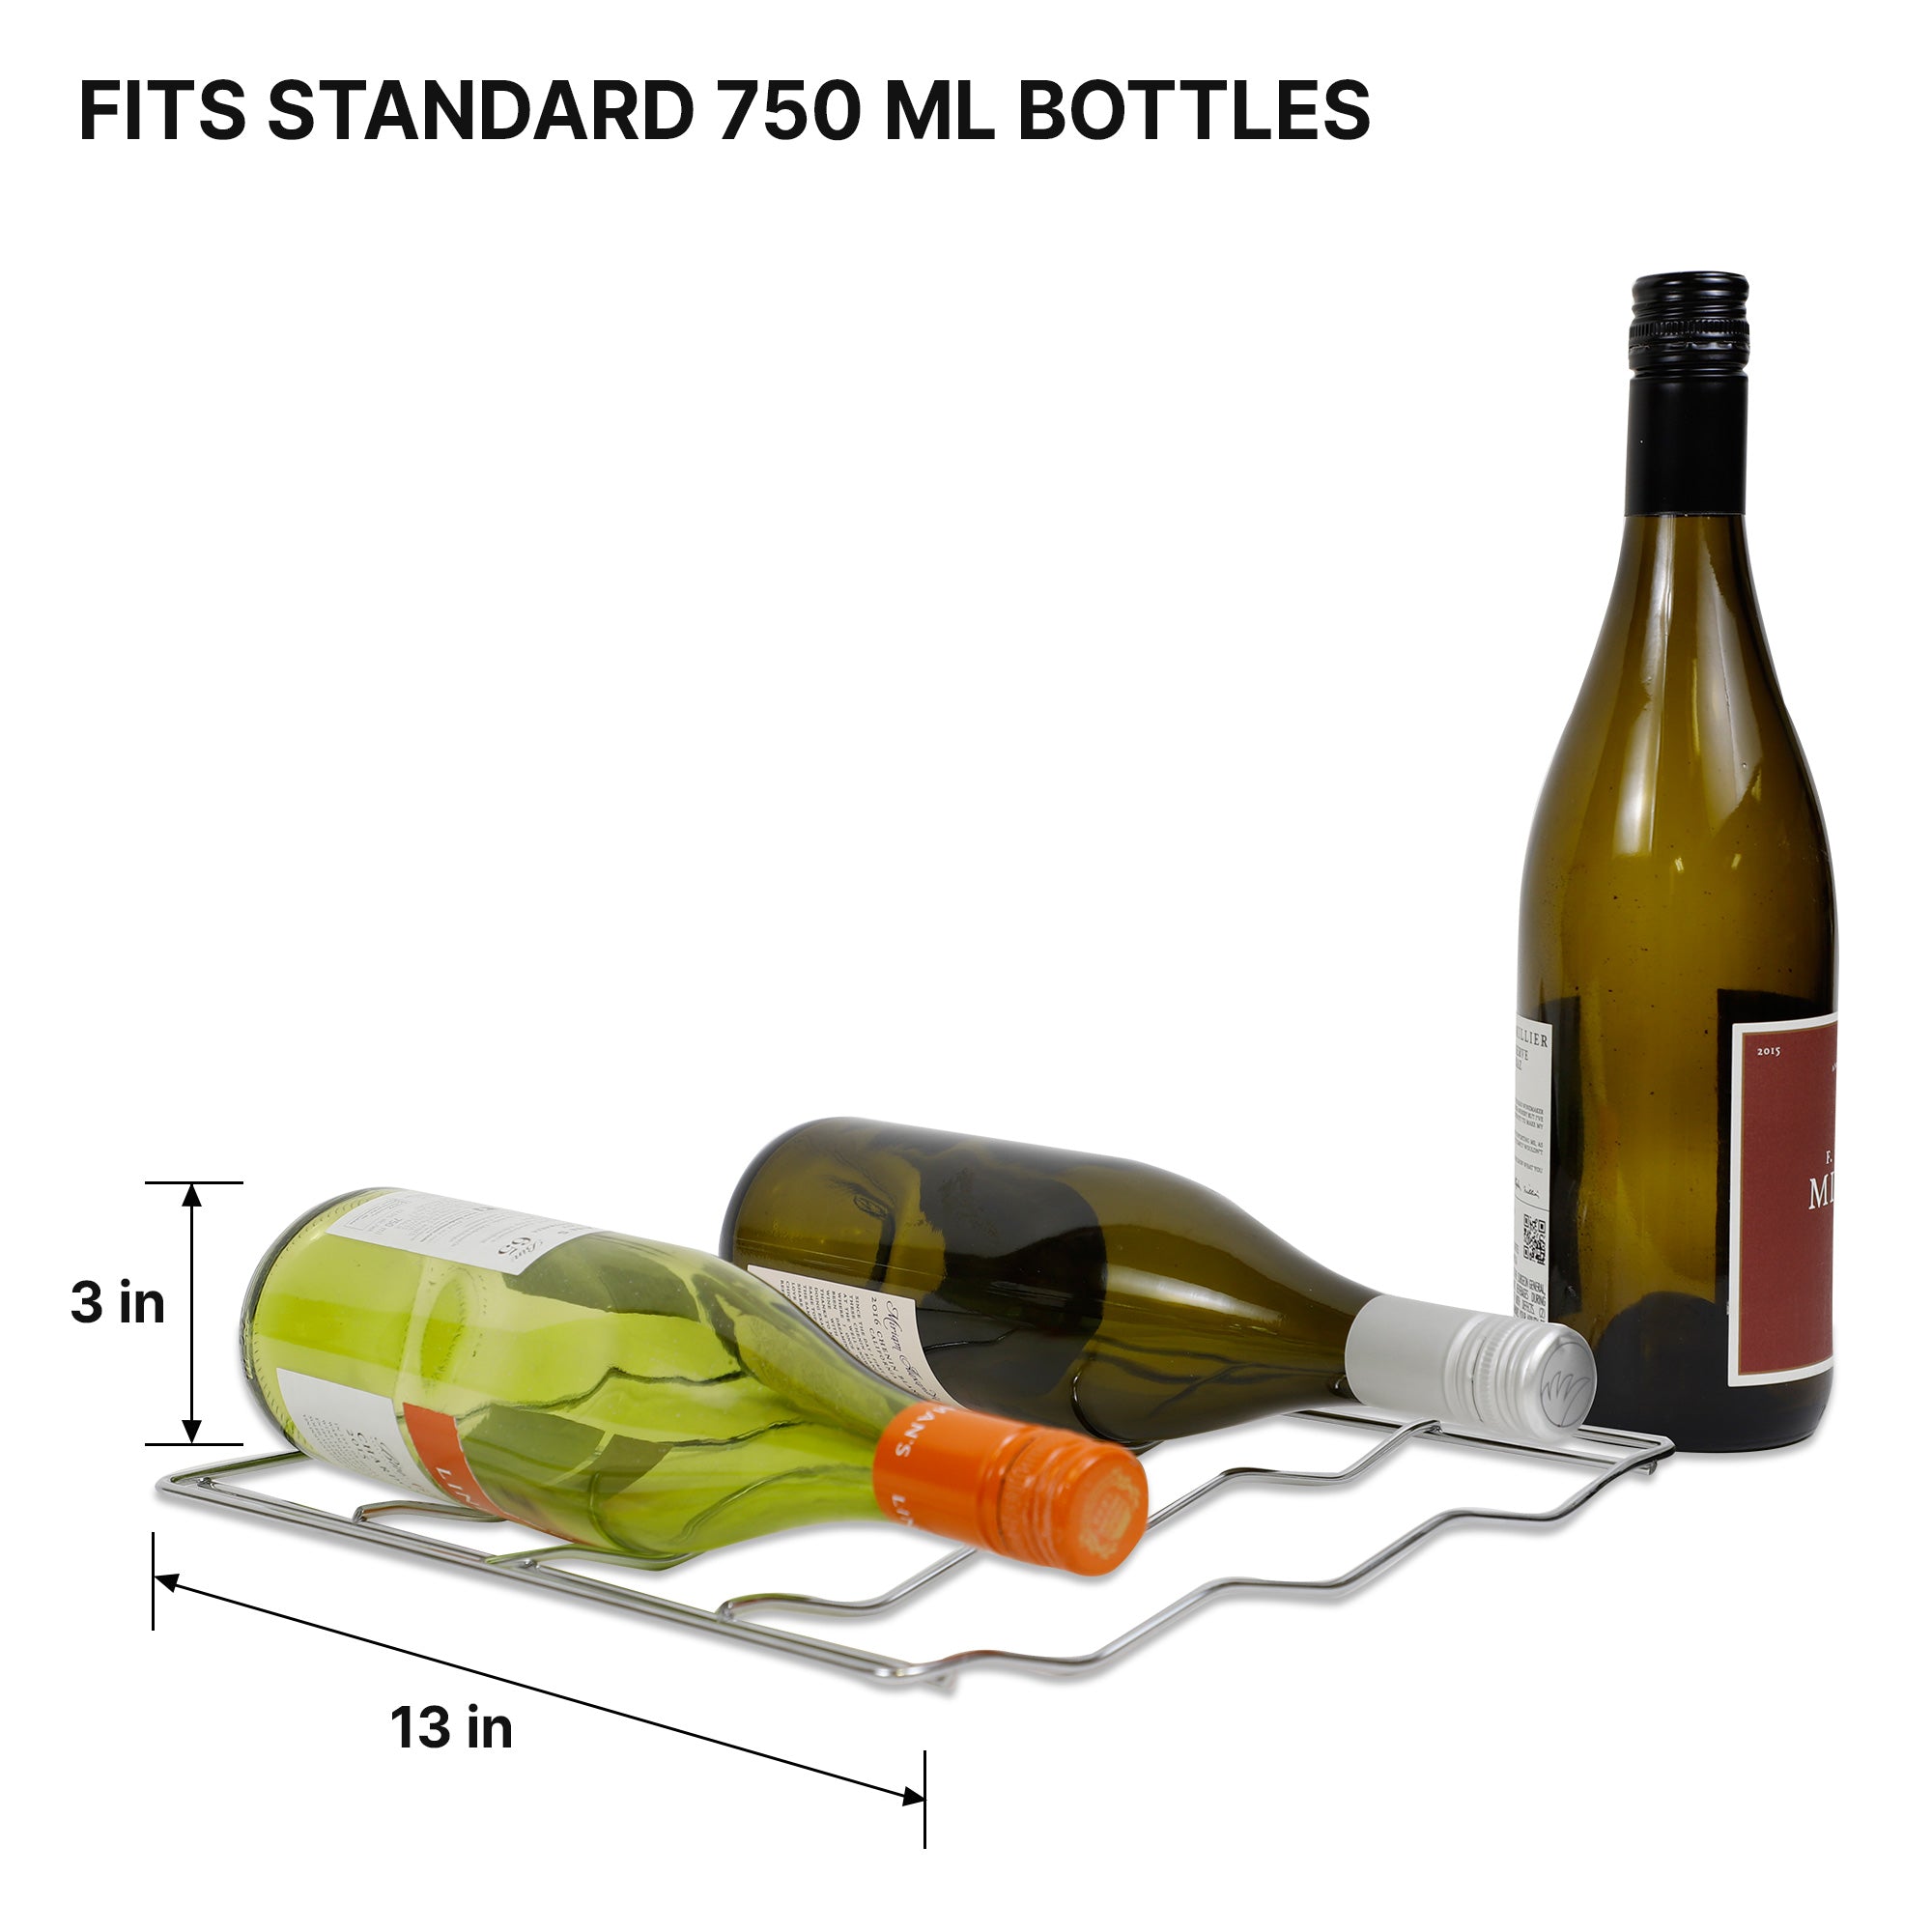 Removable wire rack from Koolatron 24 bottle wine chiller with dimensions labeled and three wine bottles lying on it and one standing up beside it. Text above reads "Fits standard 750 mL bottles"